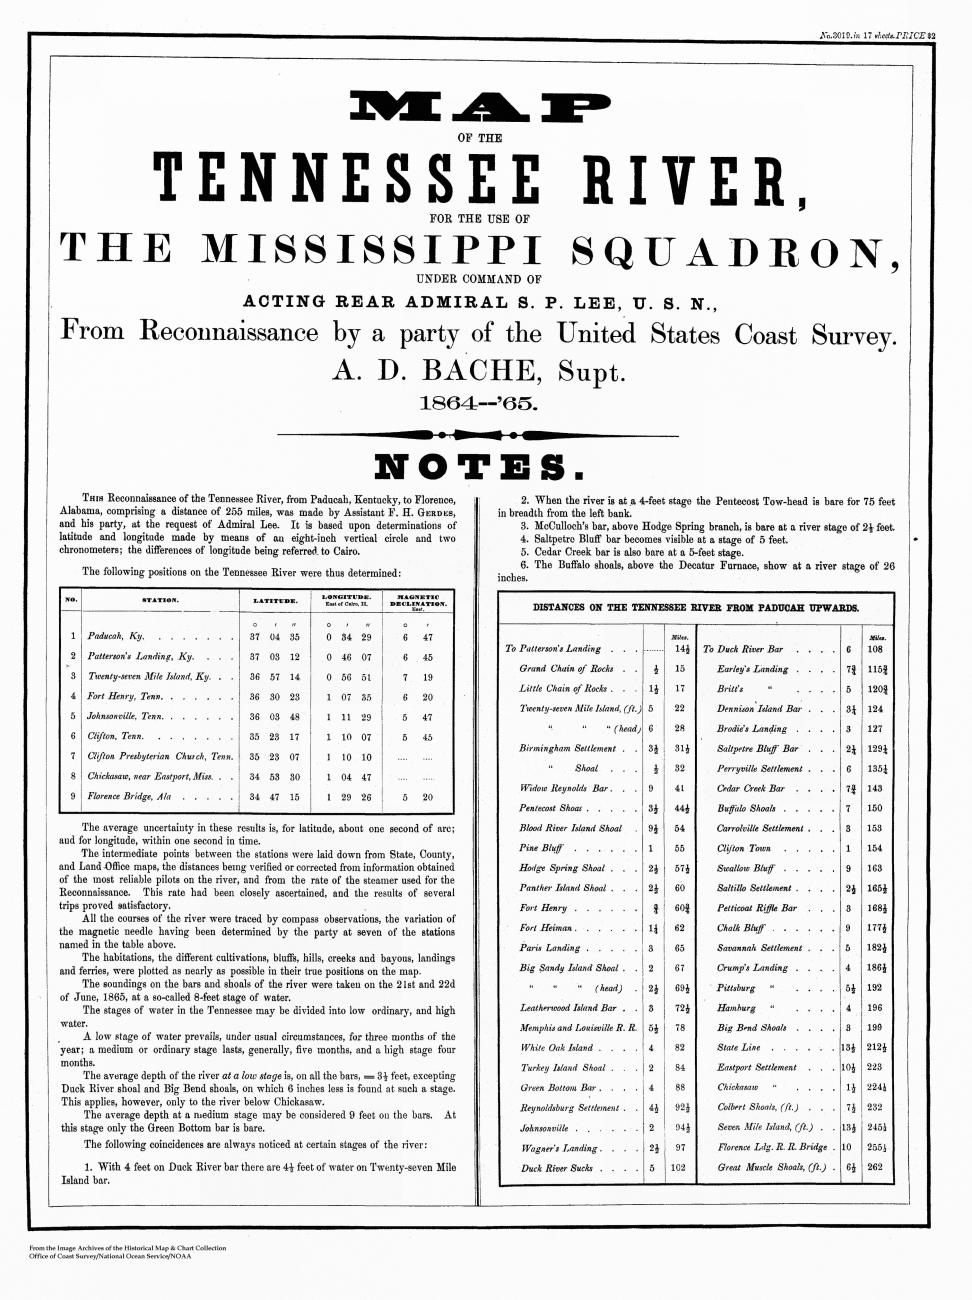 Notes accompanying a map of the Tennessee River showing water levels at variouspoints along the River from a reconnaissance made by the party of Ferdinand H